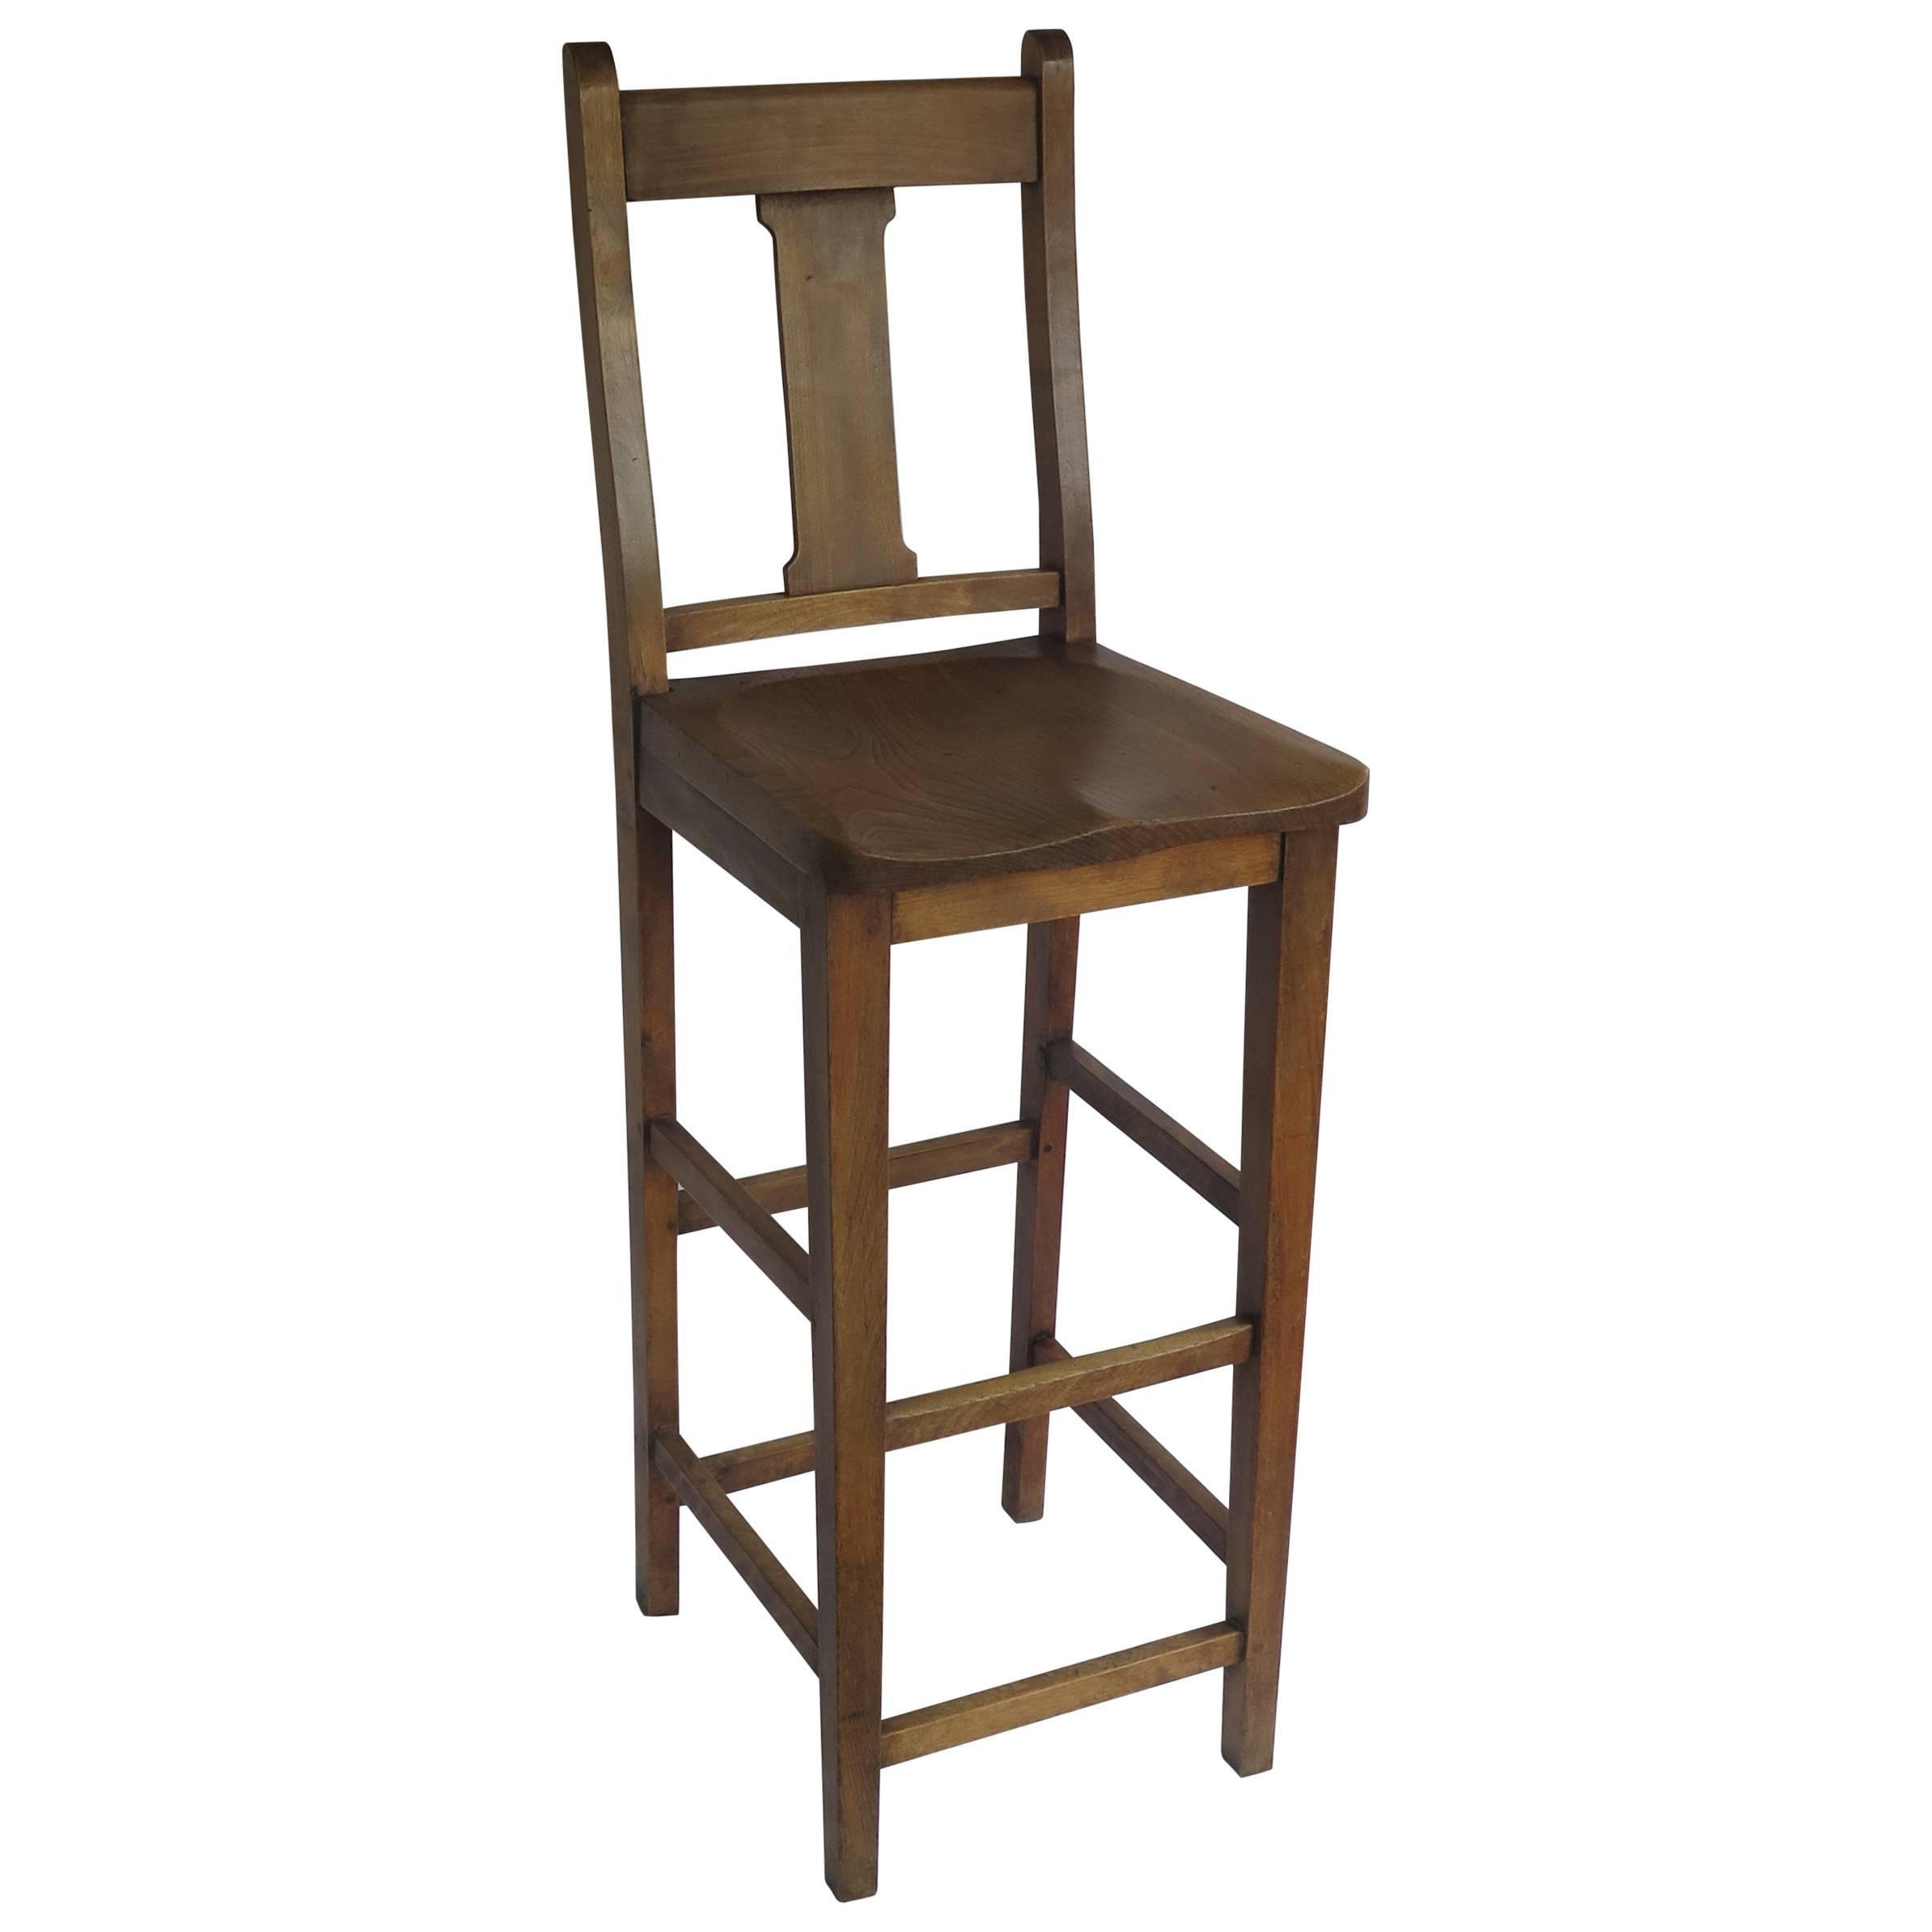 Victorian Clerk's High Chair or Kitchen Chair in Beach and Elm, English Ca. 1880